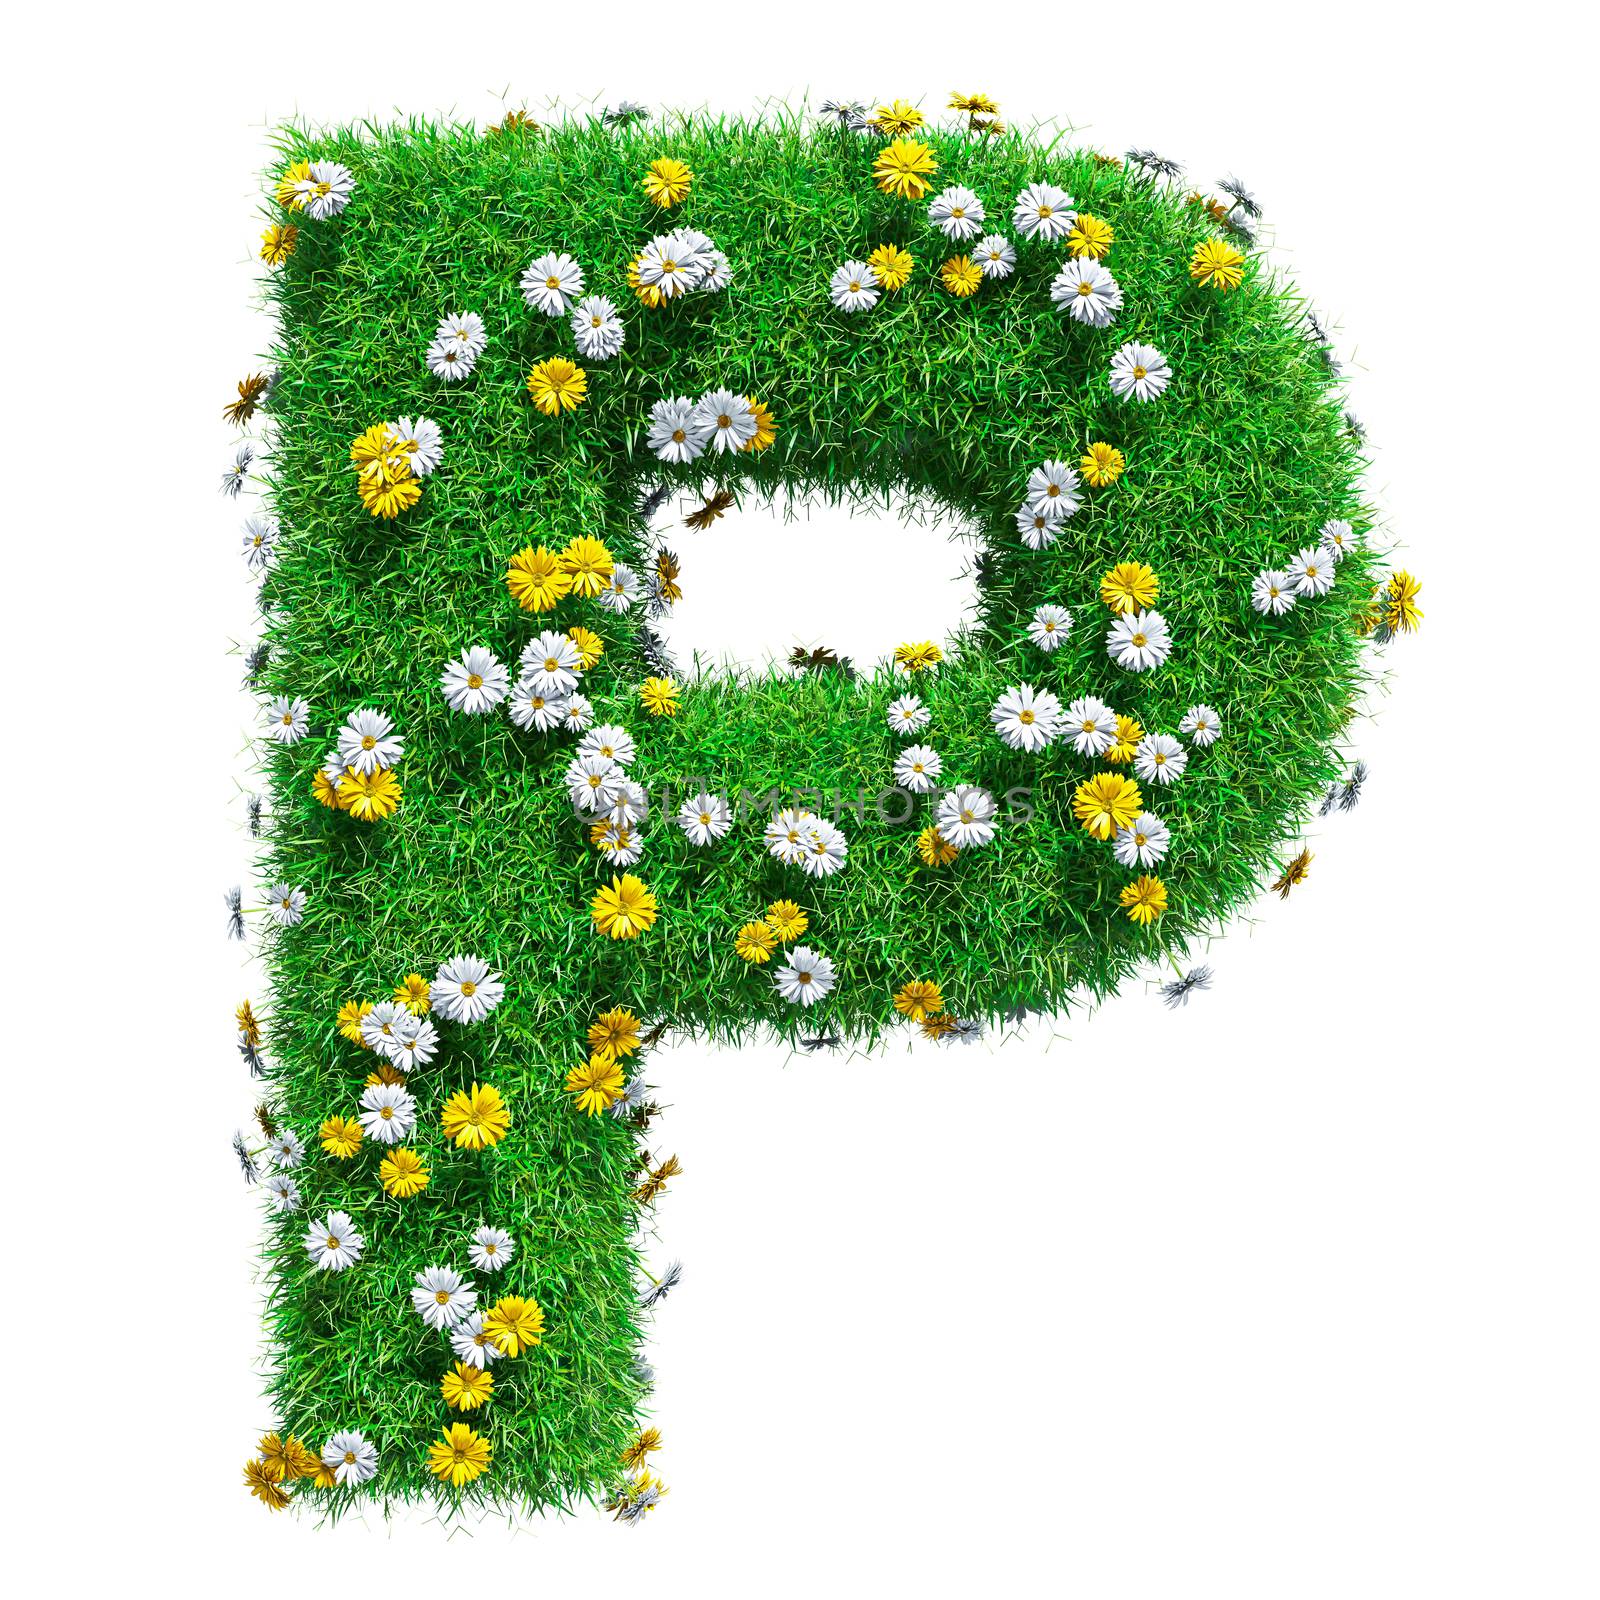 Letter P Of Green Grass And Flowers by cherezoff